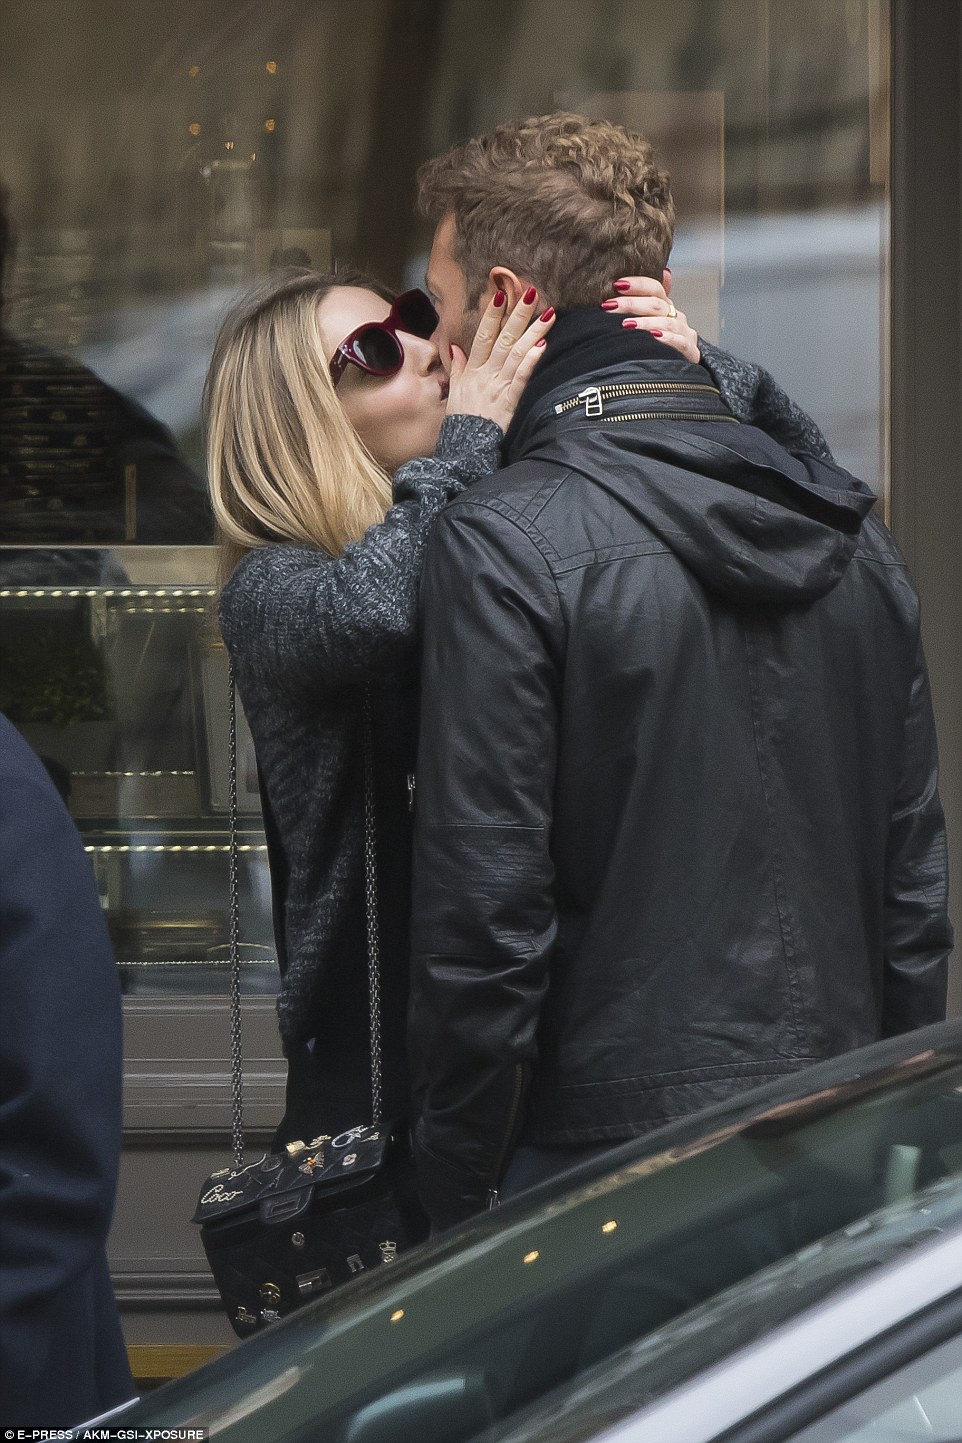 Locking lips: Appearing carefree as they stepped out in Le Marais district, the pair were inseparable as they soaked up the sights and enjoyed the ambience with an embrace